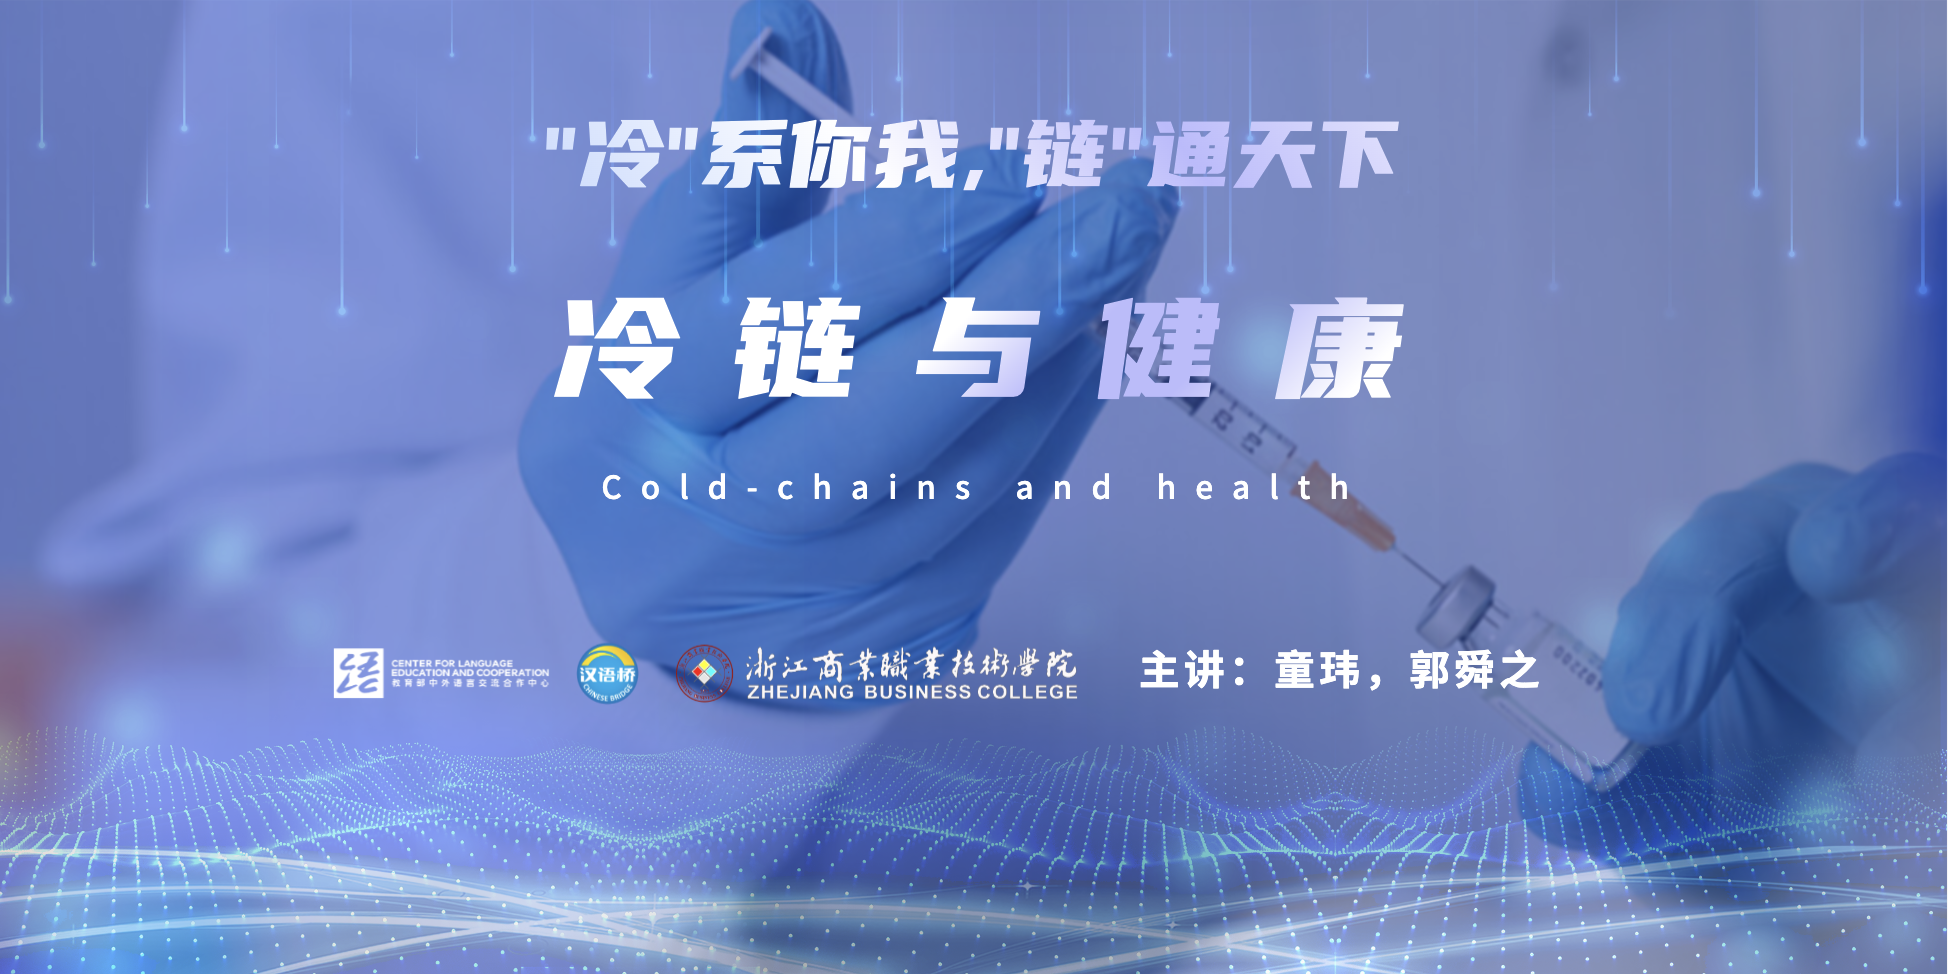 Cold-chains and health